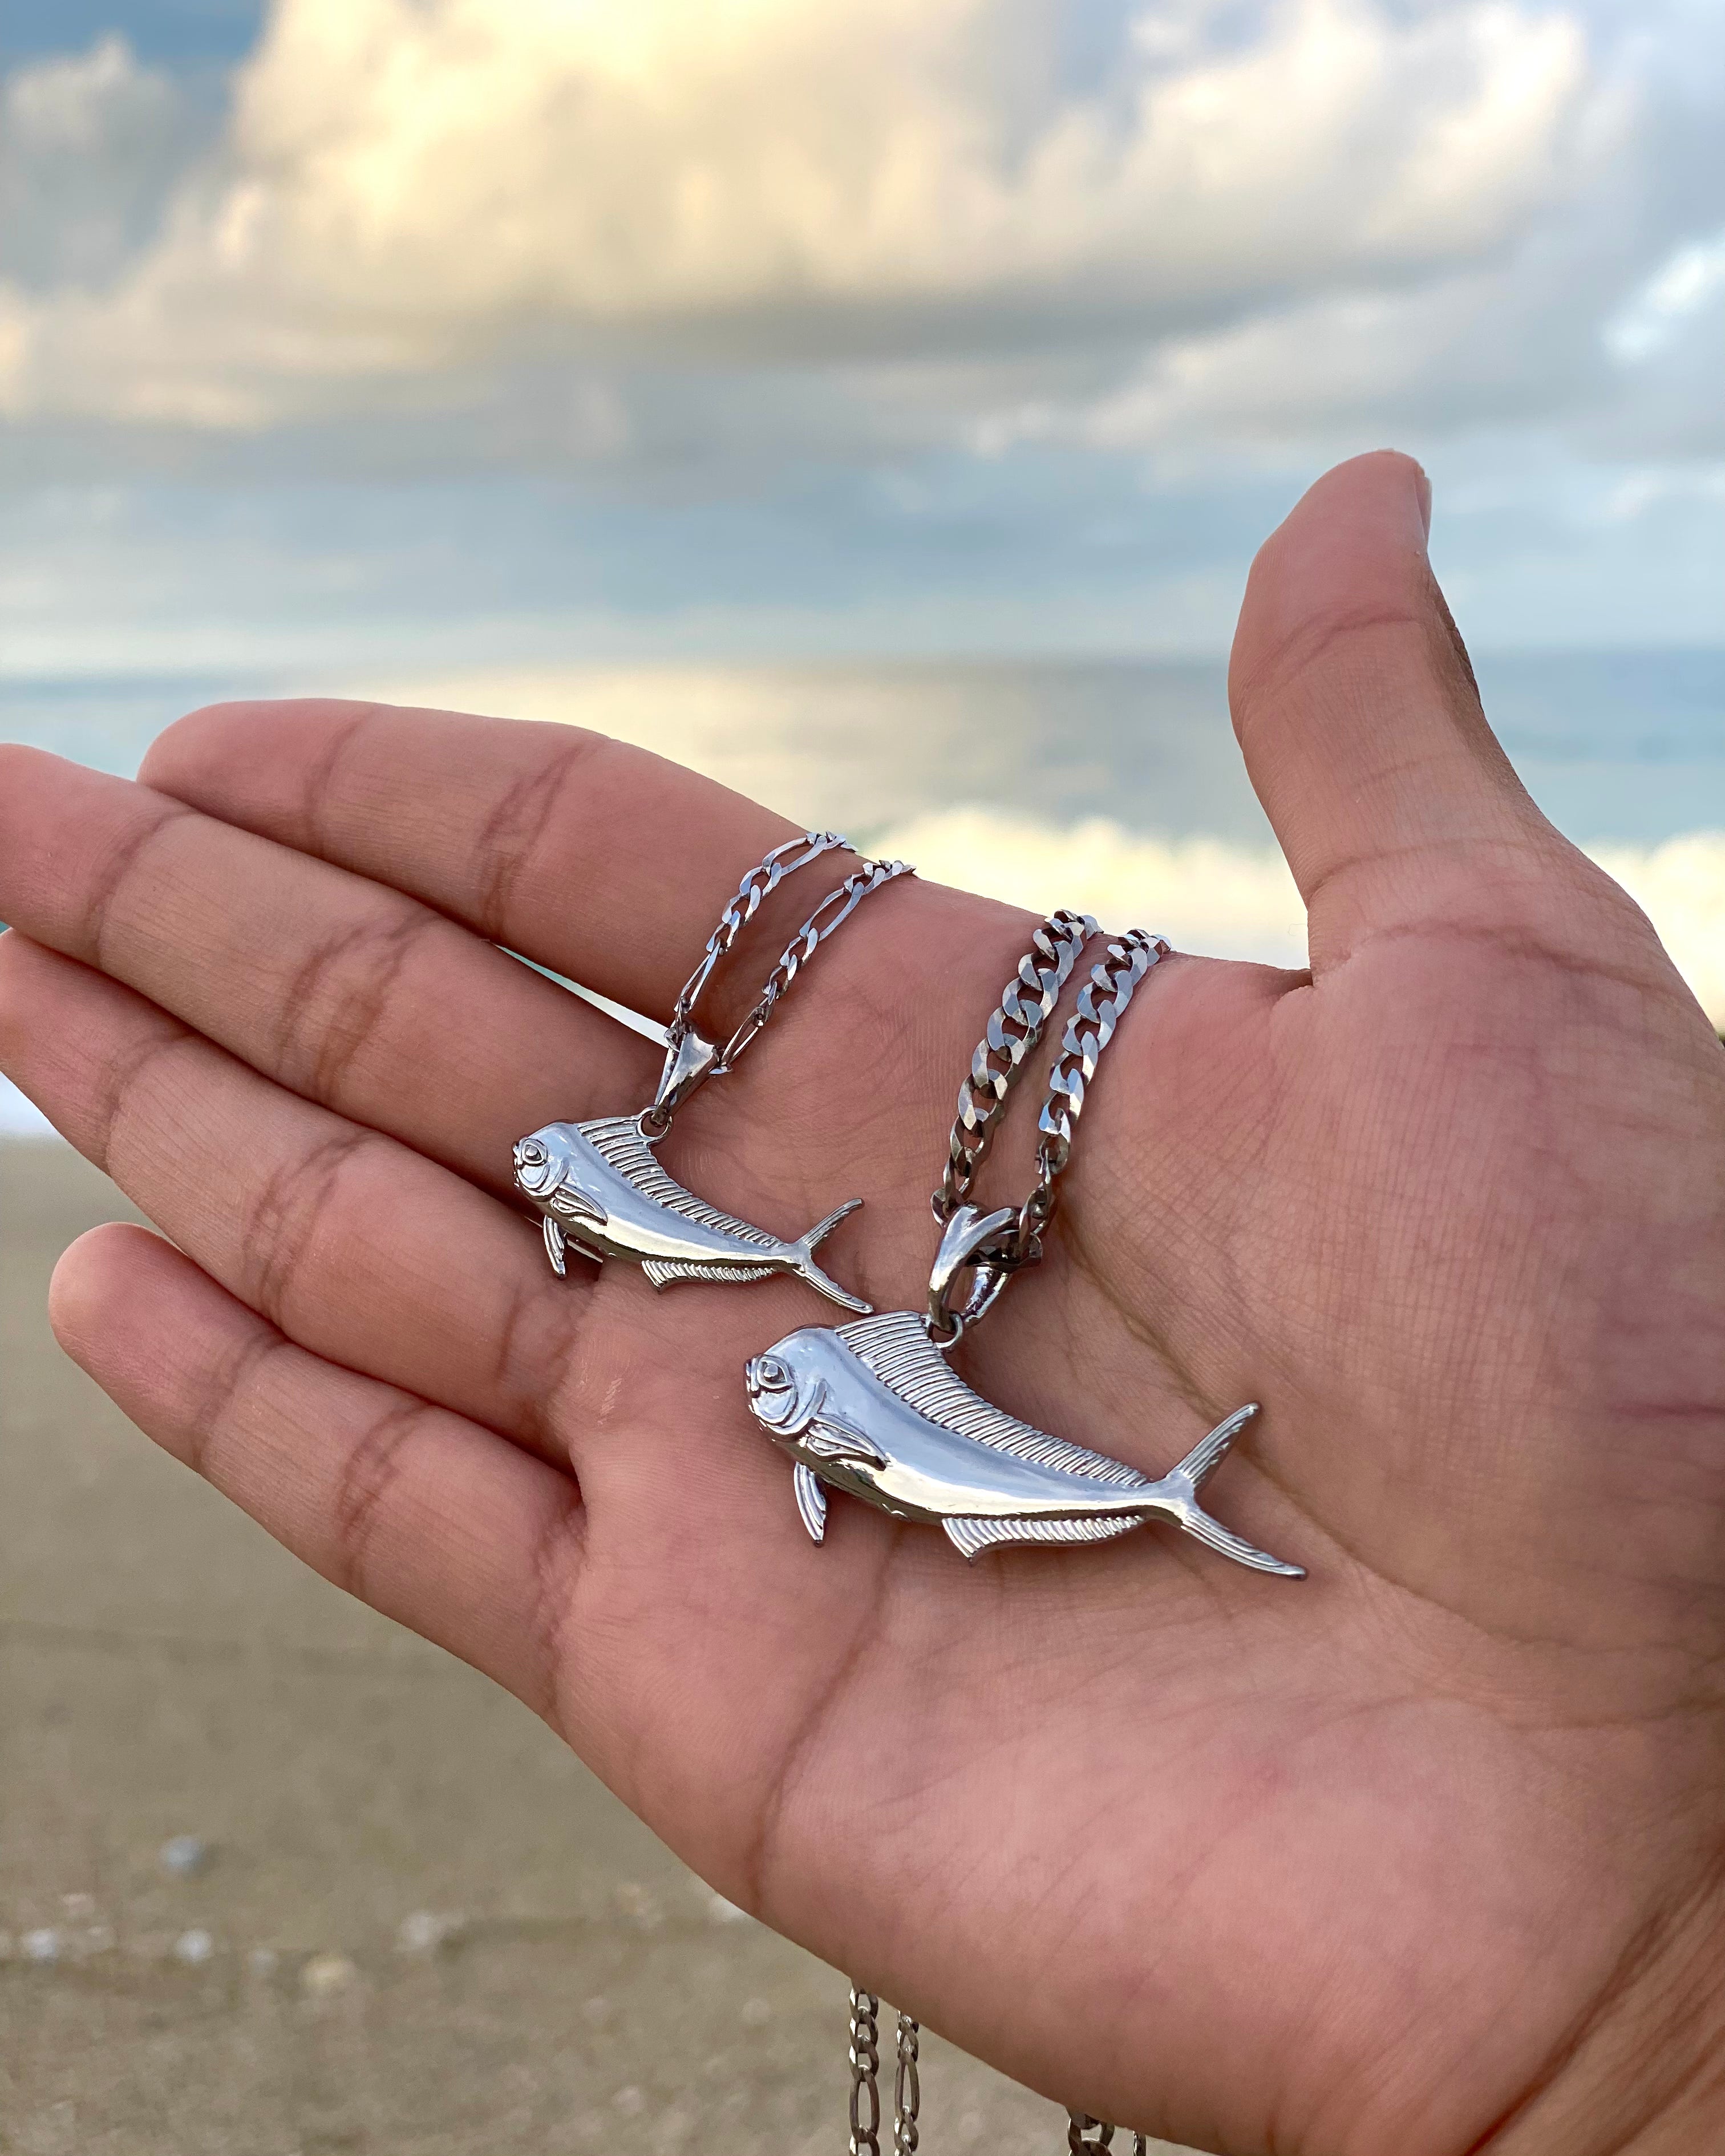 Standard and Small size Mahi Mahi Dolphin fish necklaces in silver by Castil.